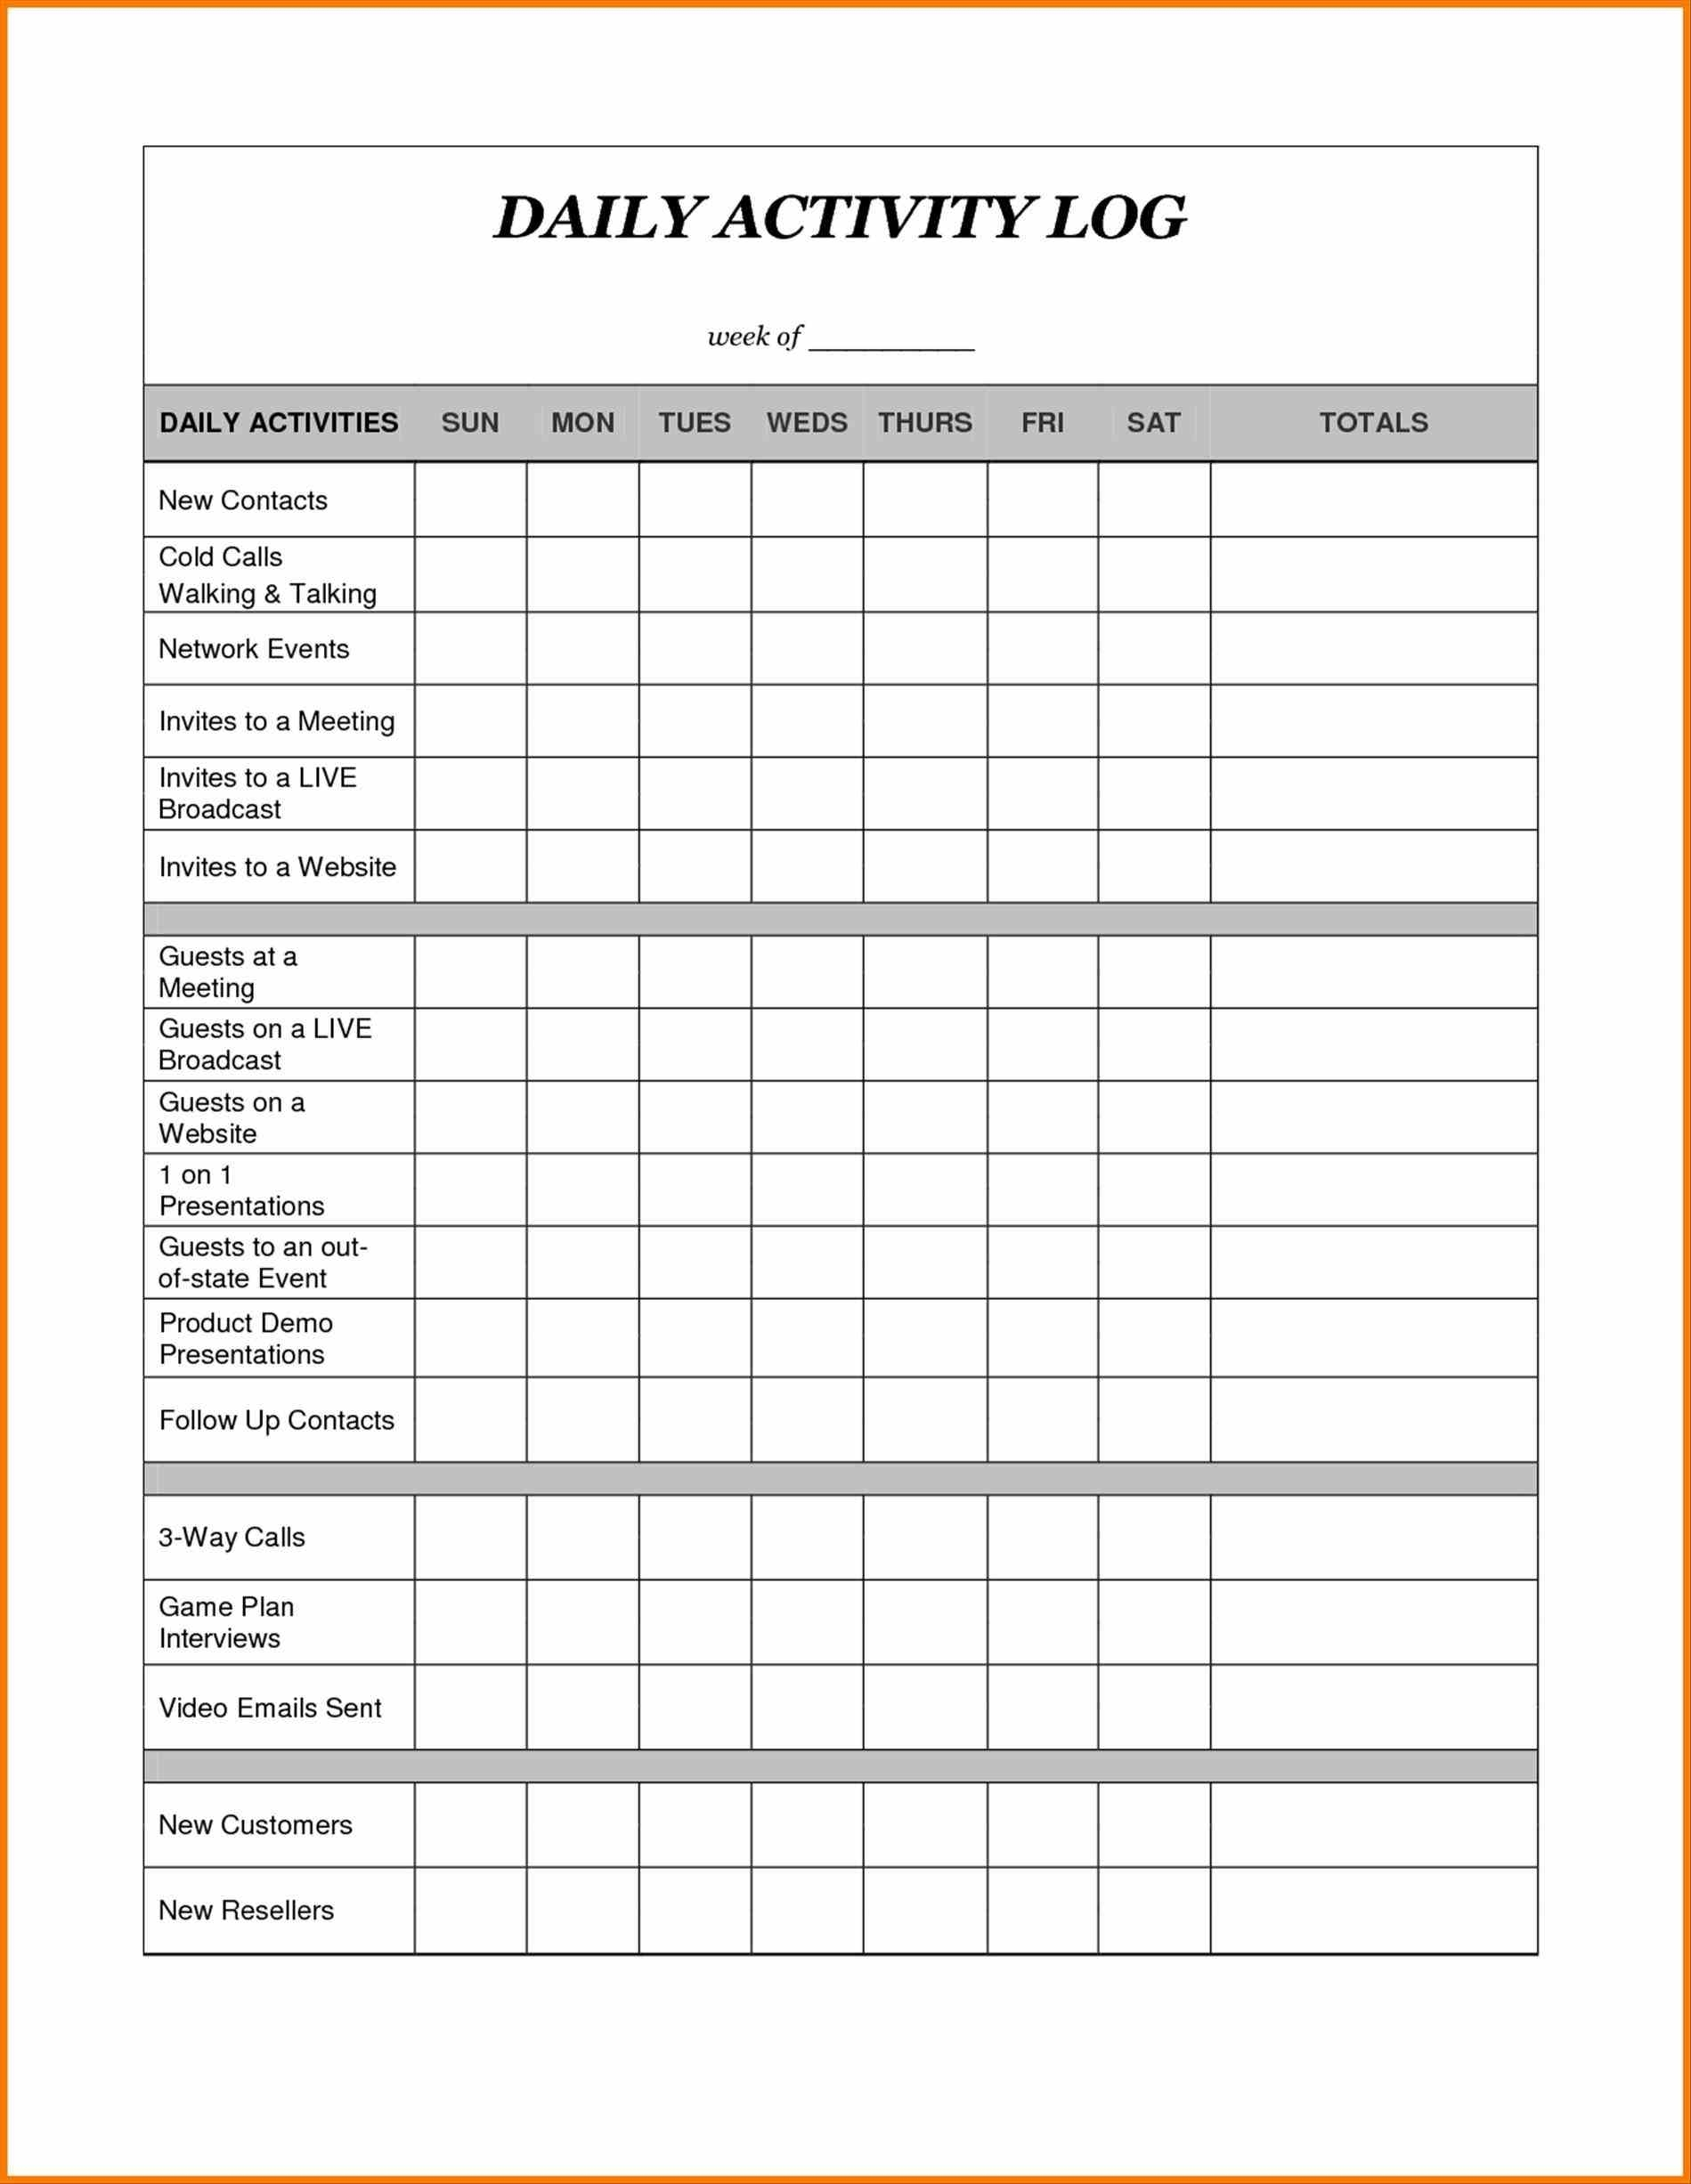 Net Worth Excel Template Financial Statement Templates Word Excel For Business Activity Statement Spreadsheet Template